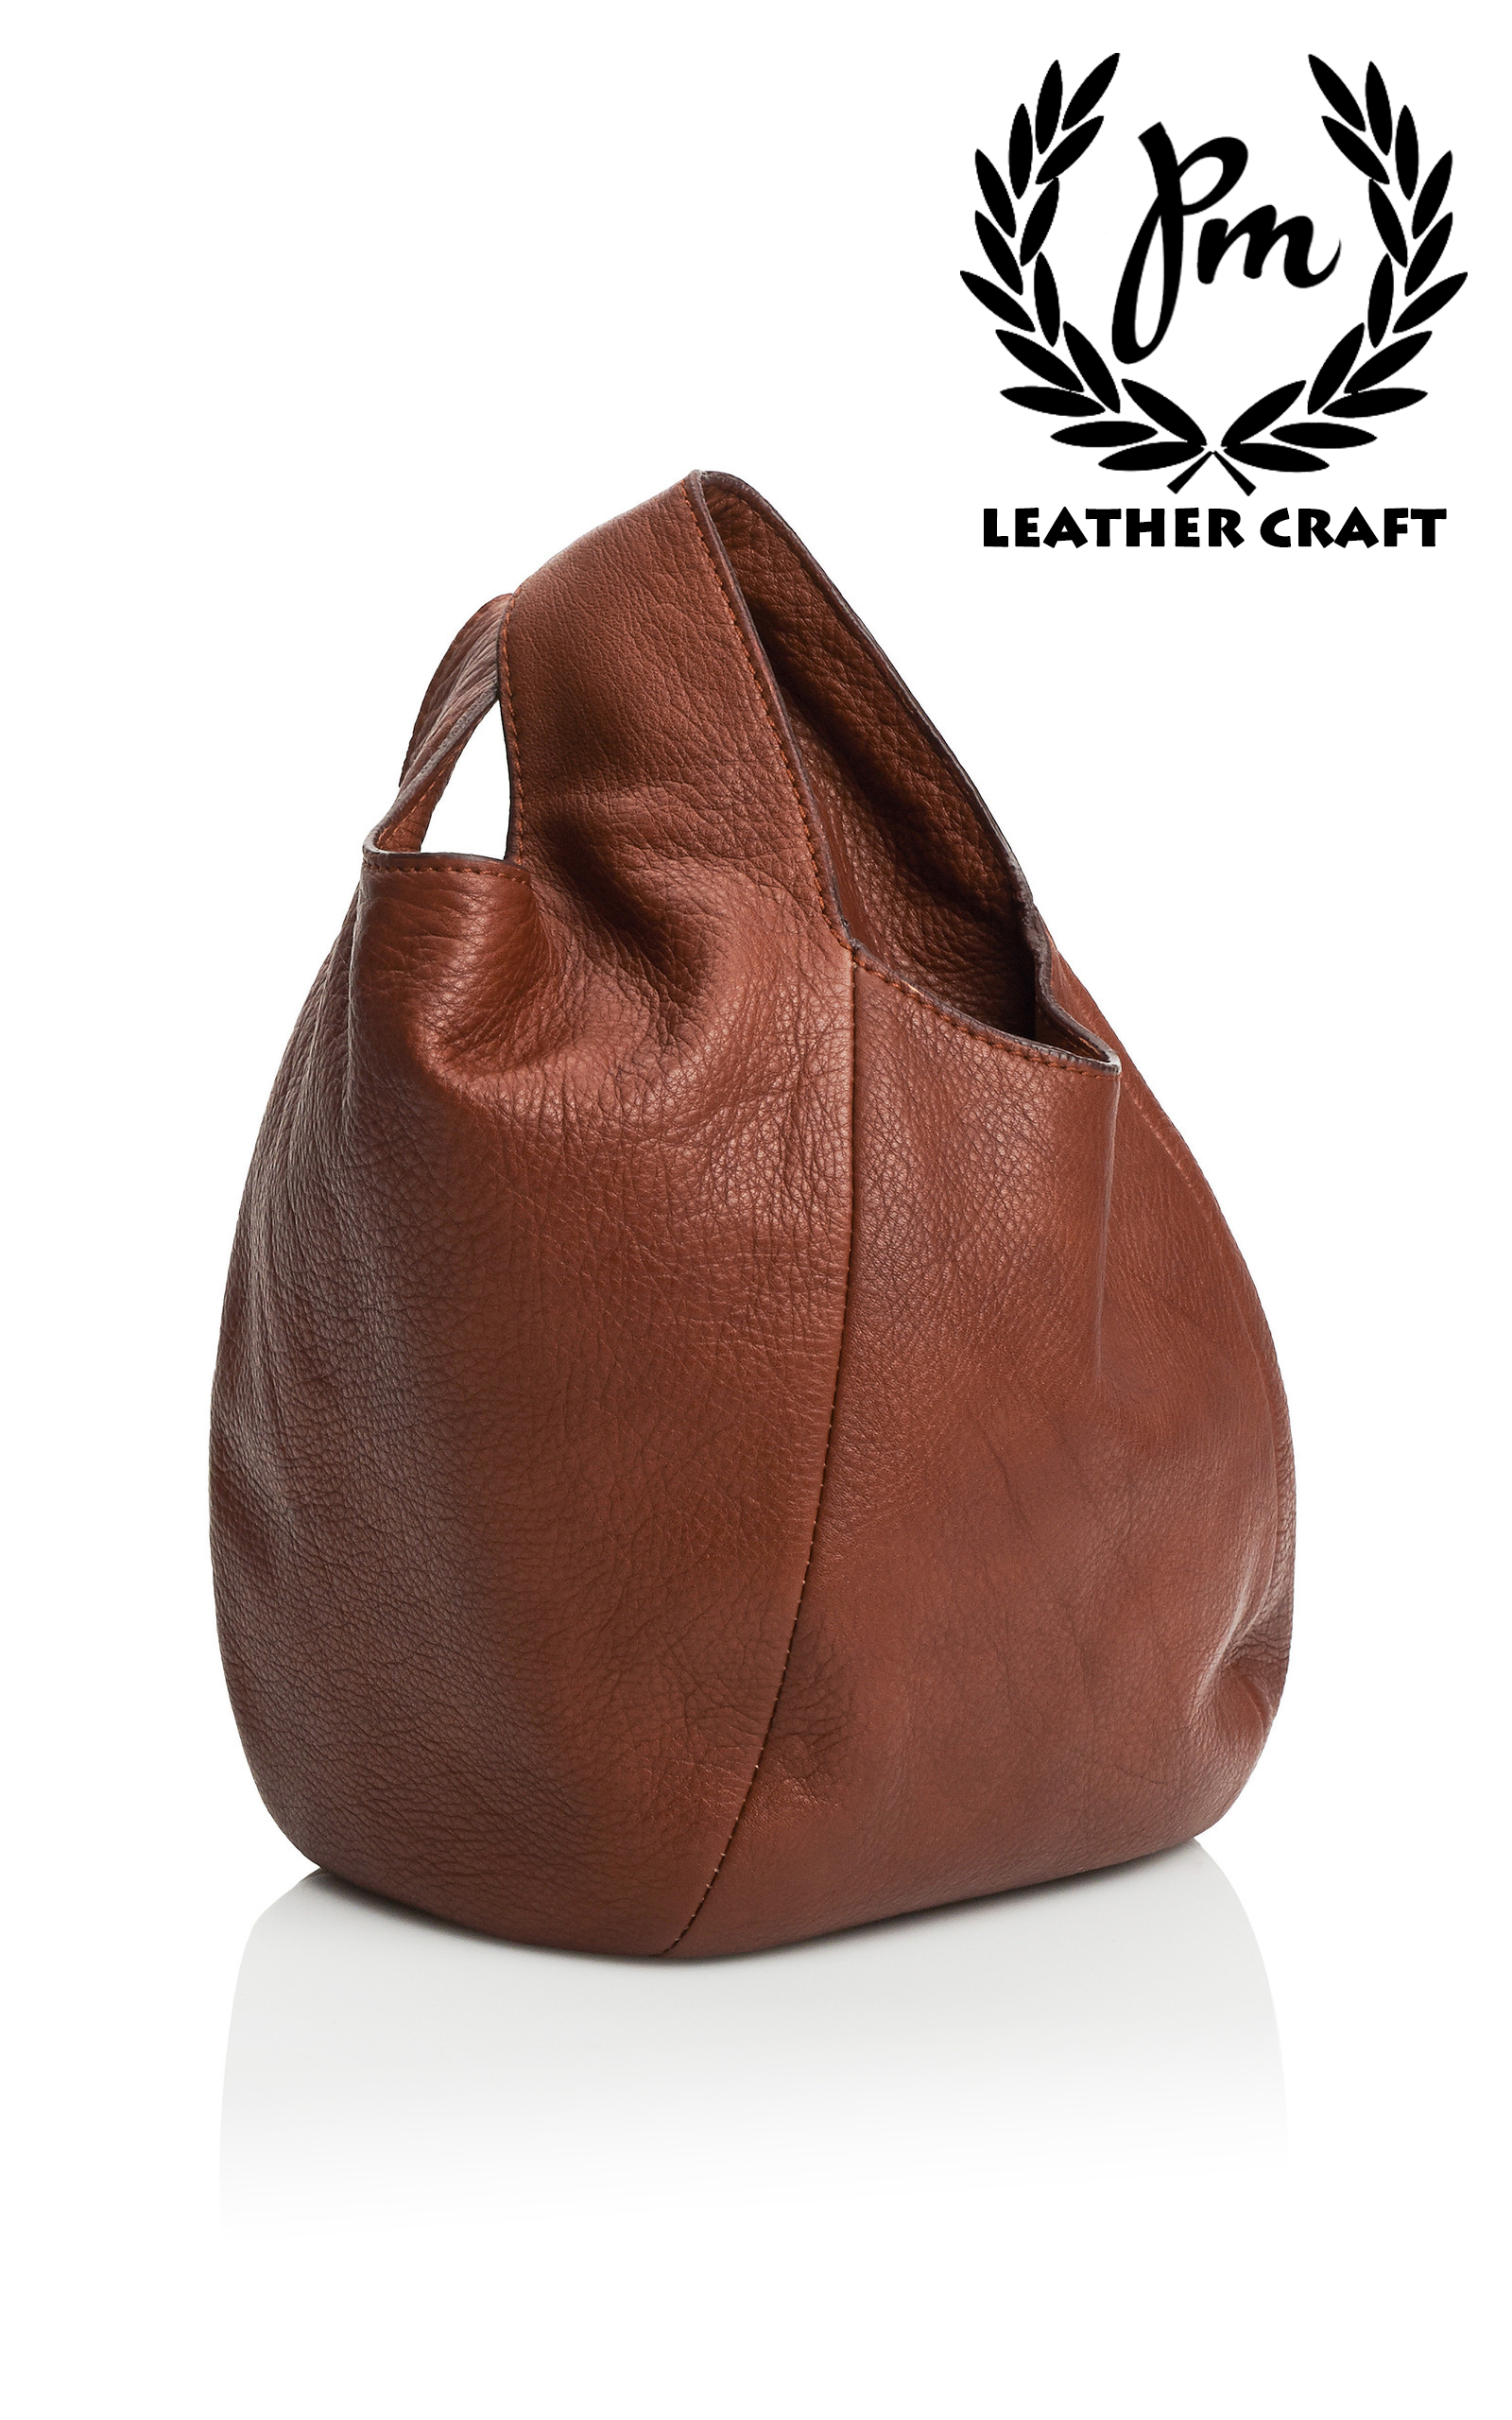 PM LEATHER CRAFT, Leather Knot Bags Chennai, Leather Knot Bag in Chennai, Leather Knot Bag manufacturer in Chennai,Leather Knot Bags Manufacturer Chennai, Leather Knot Bags exporter in Chennai, Leather Bags in Chennai,Leather Bag Exporter